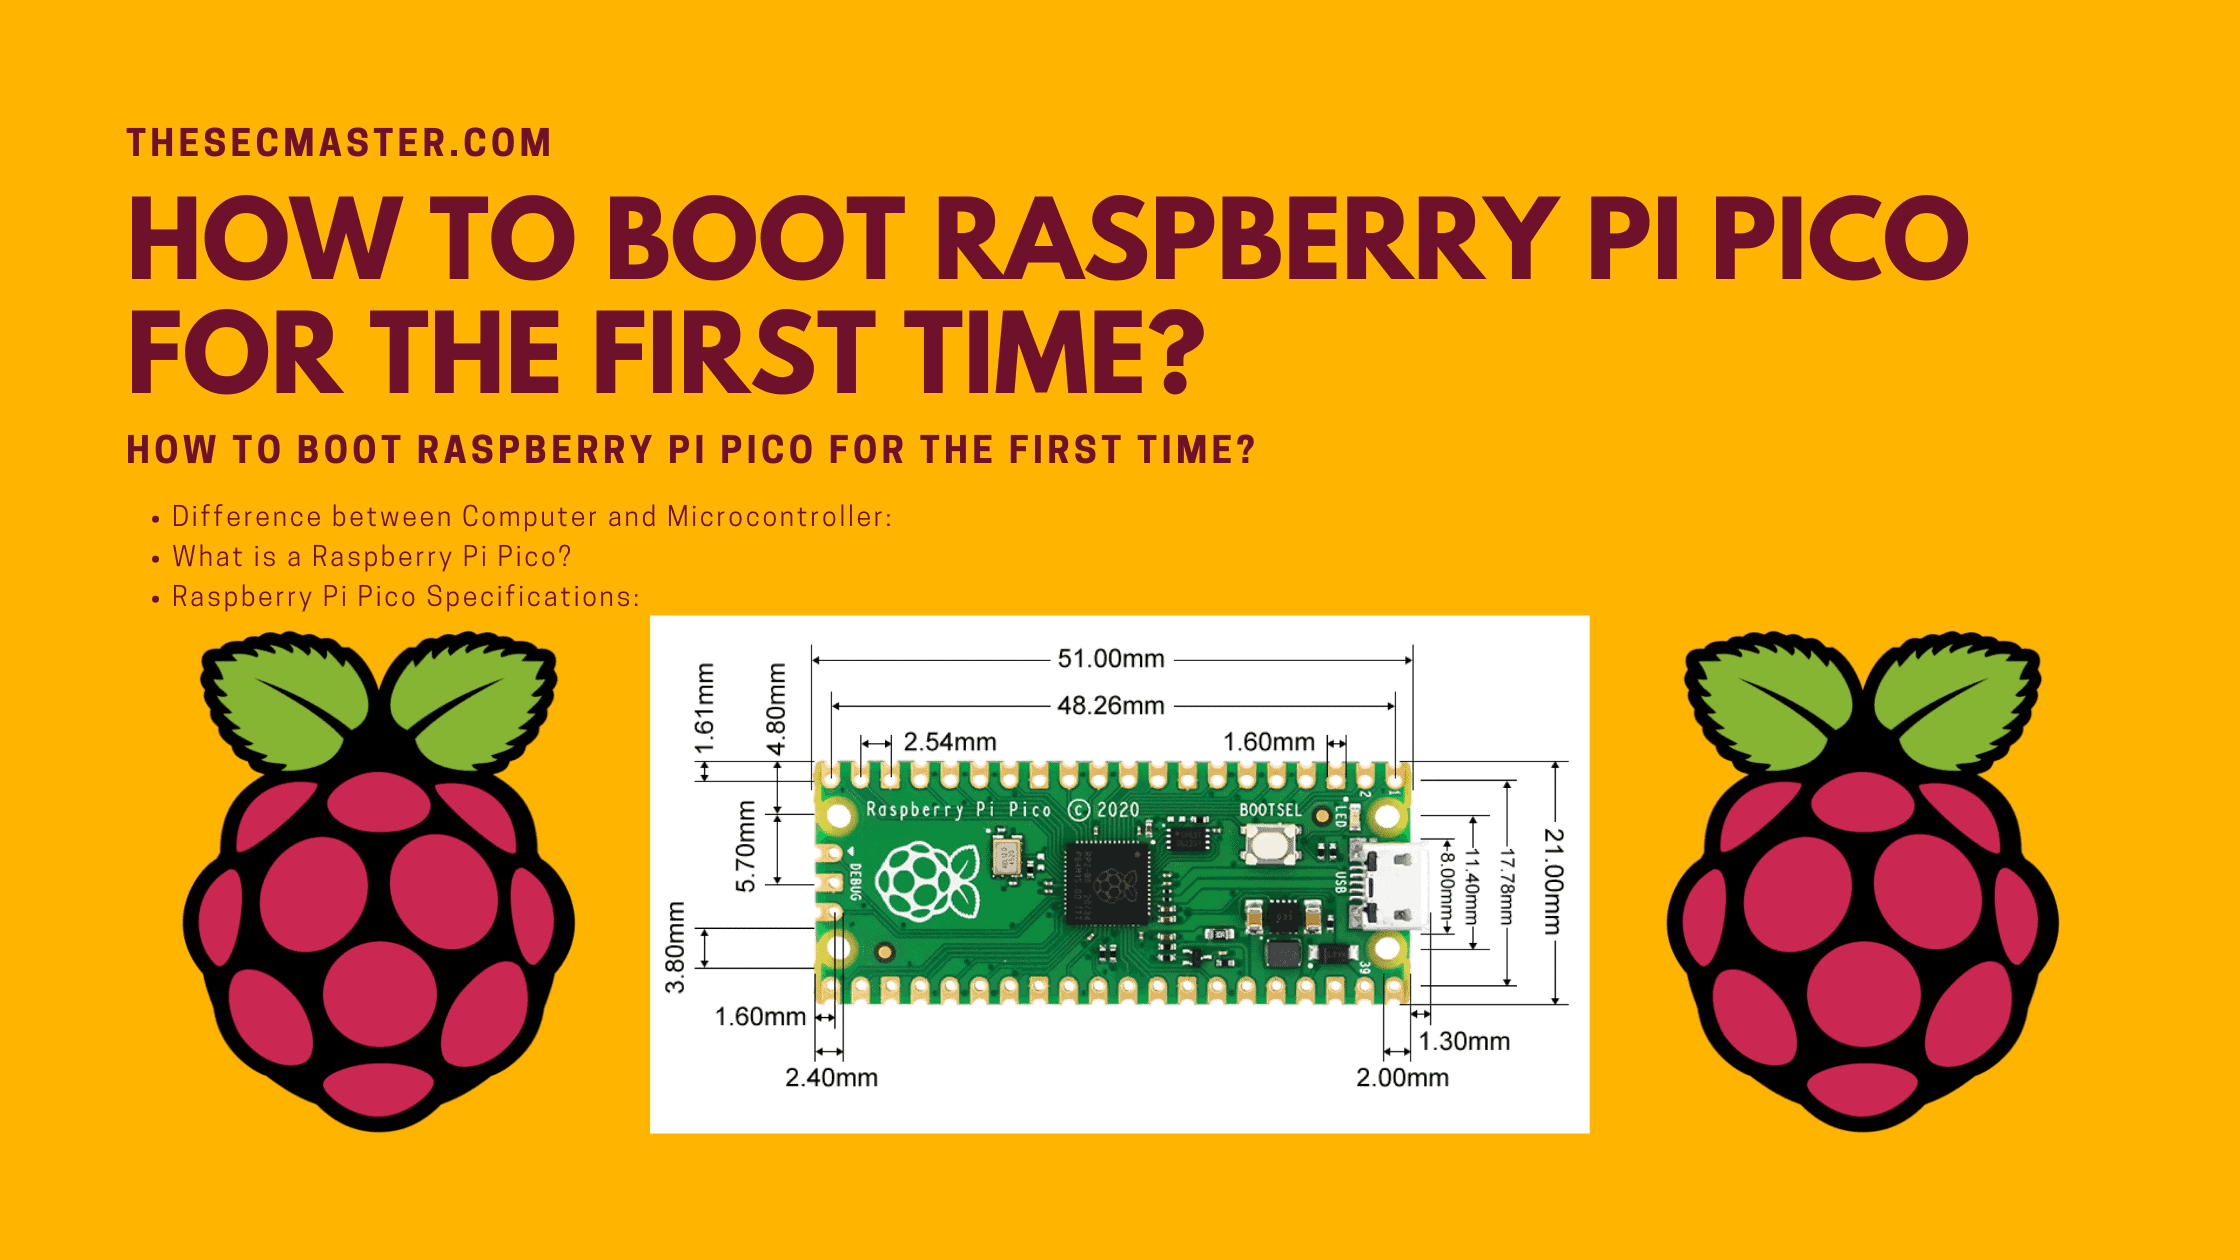 How To Boot Raspberry Pi Pico For The First Time